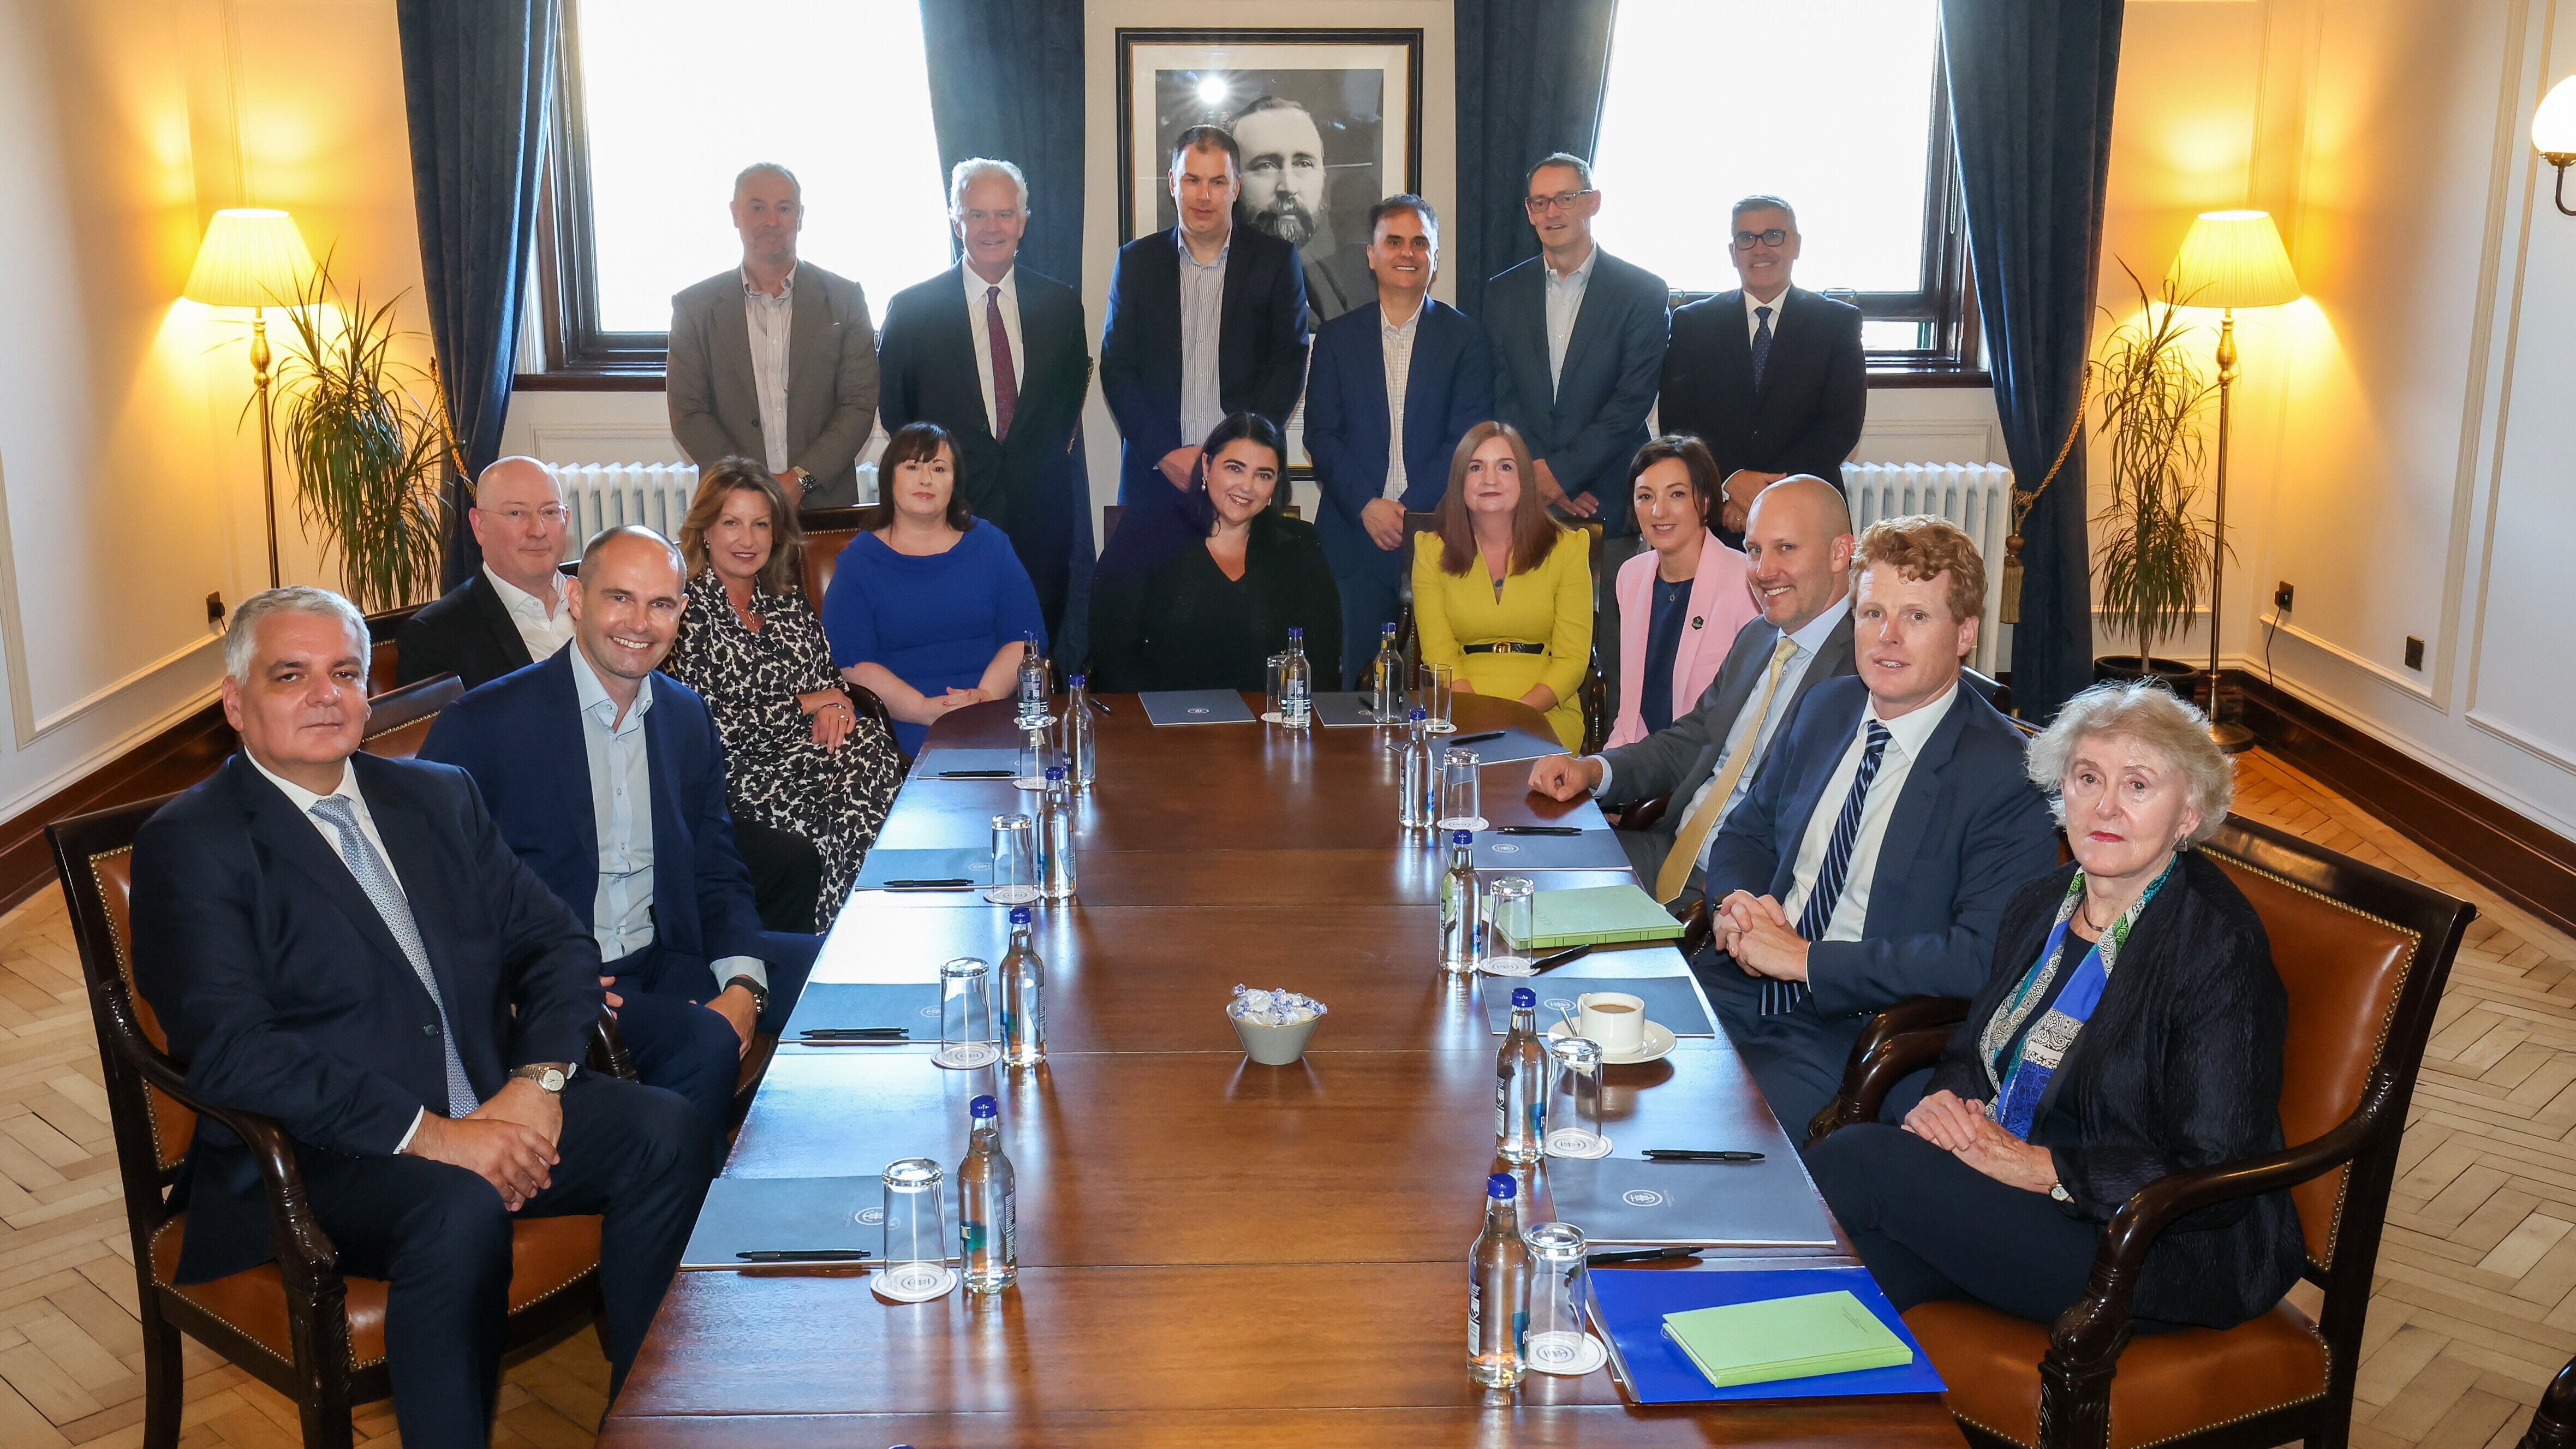 Members of the new life & health sciences advisory board which aims to strengthen trade and investment opportunities between Northern Ireland and the US. They are pictured with Joe Kennedy III, US Special Envoy to Northern Ireland; Mel Chittock, Invest NI interim chief executive; and Jayne Brady, head of the NI Civil Service